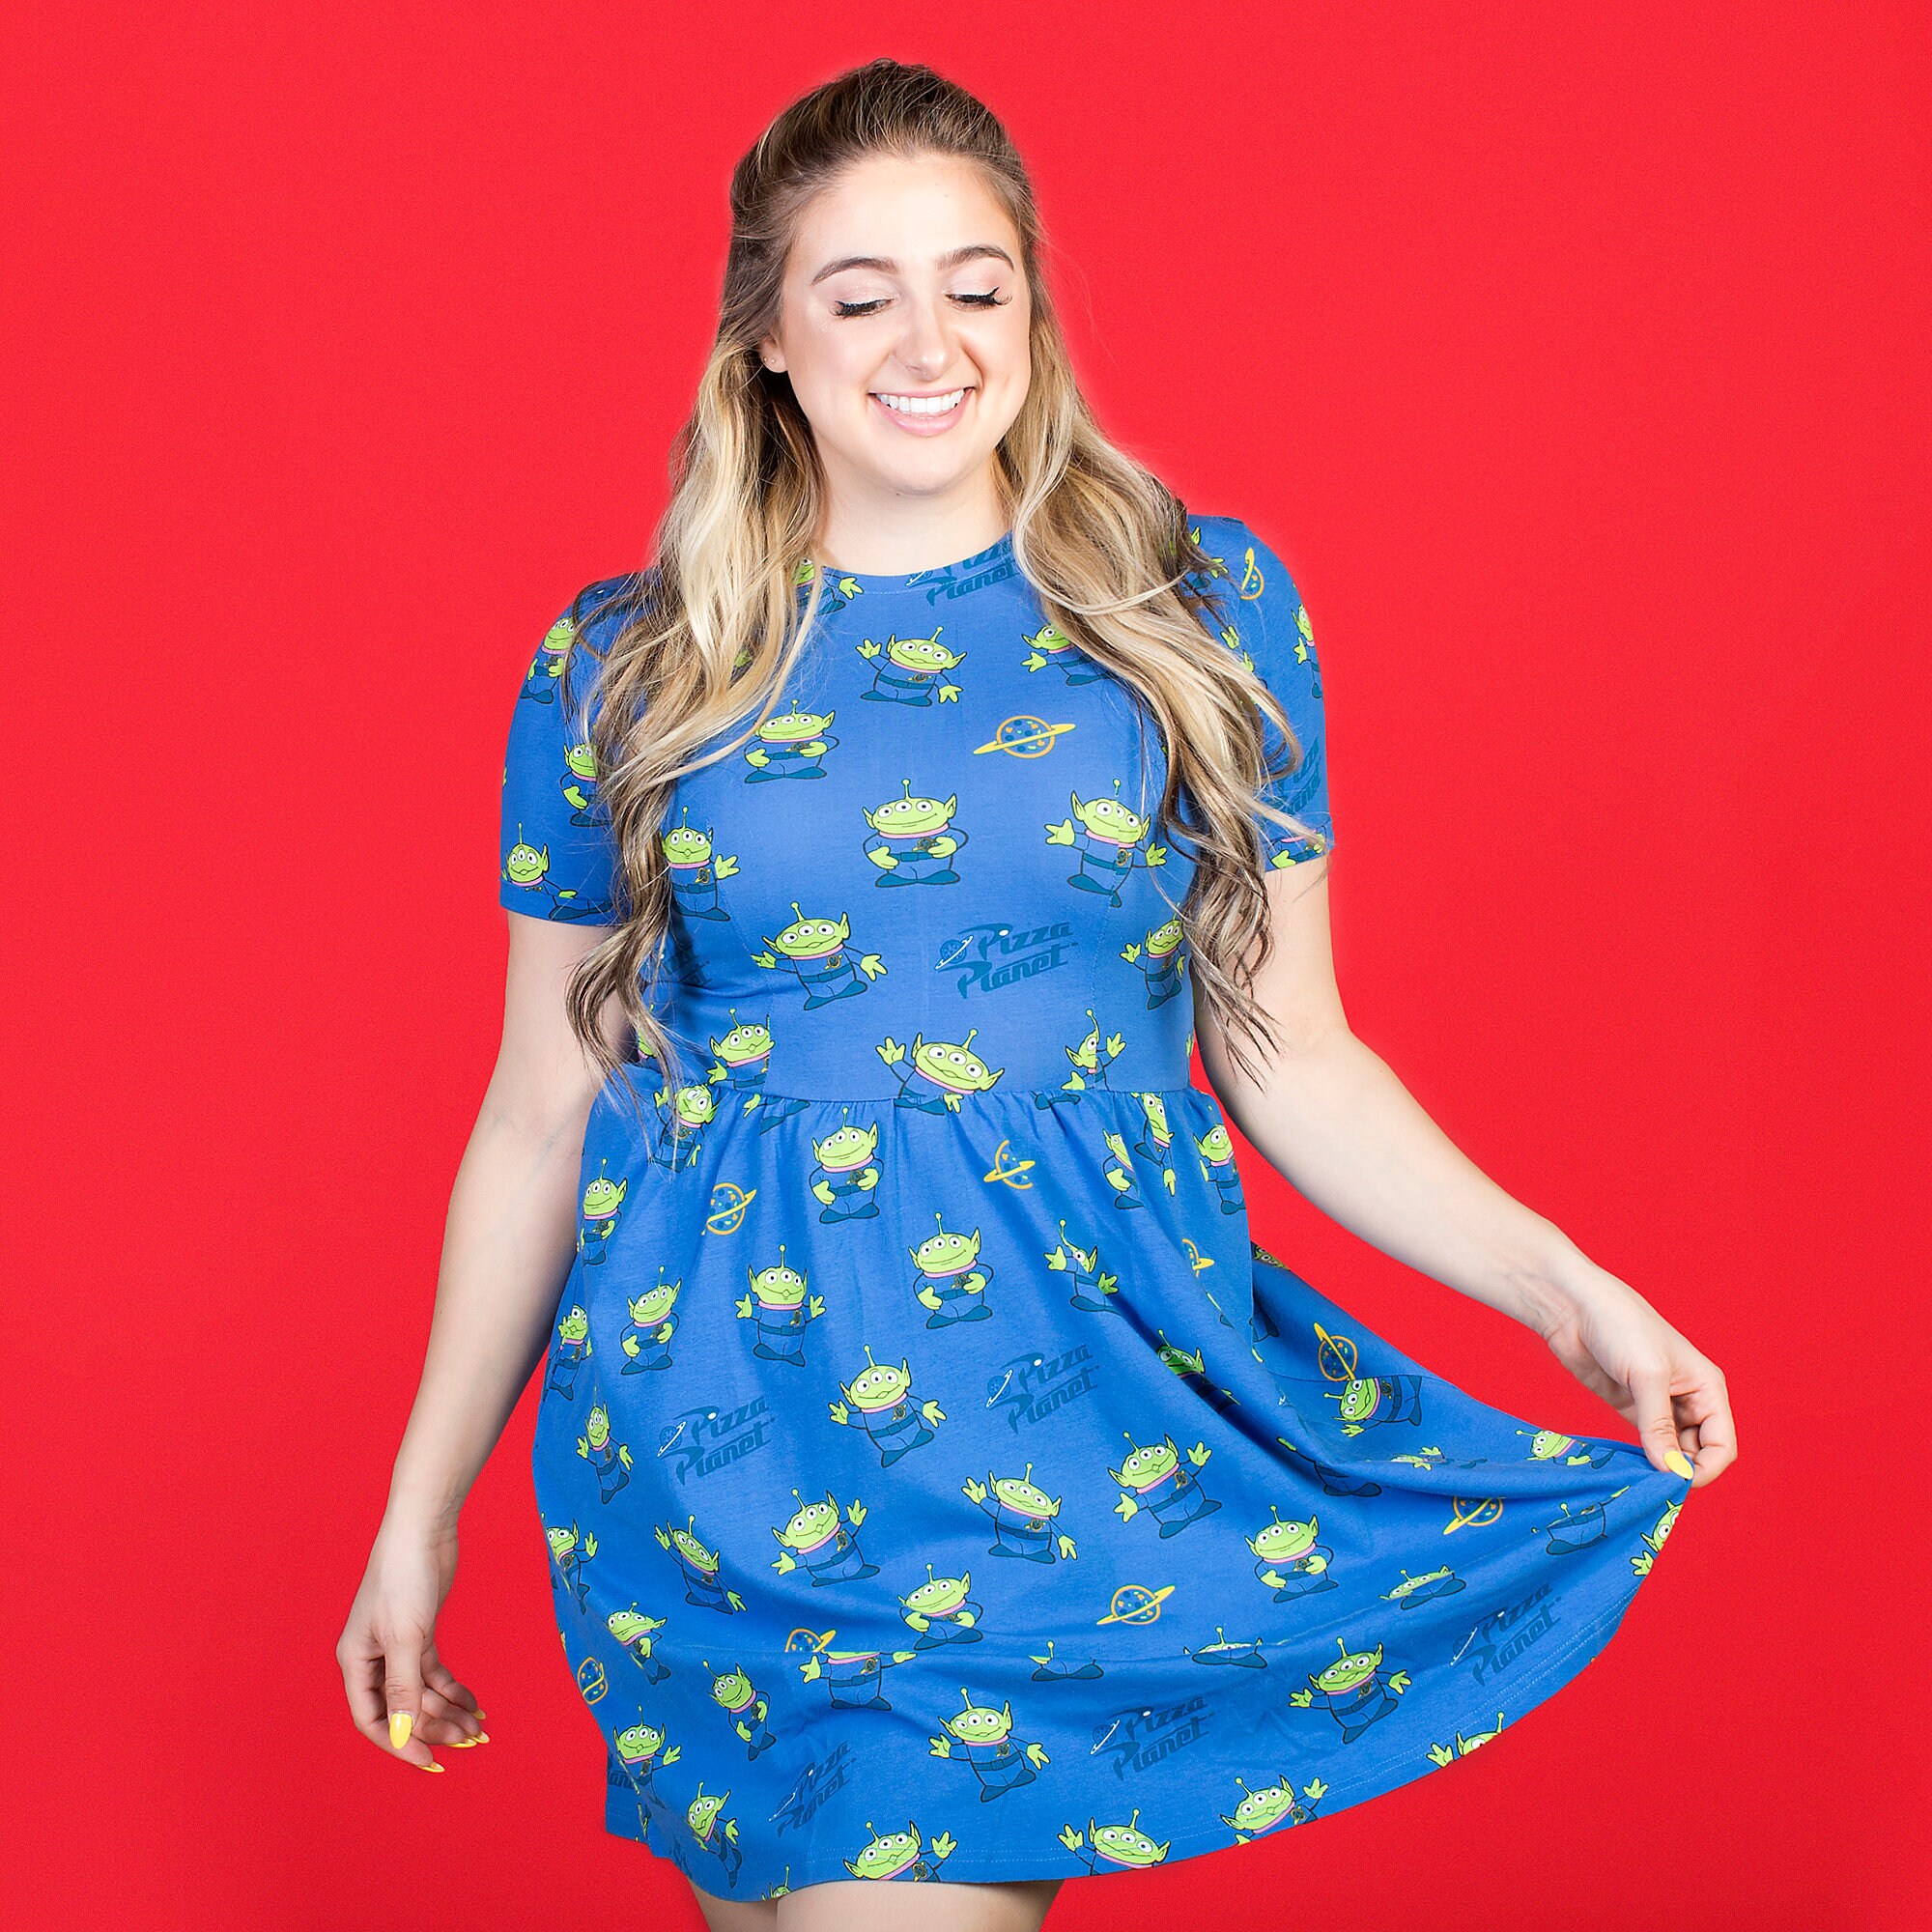 Pizza Planet Dress for Women by Cakeworthy - Toy Story 4